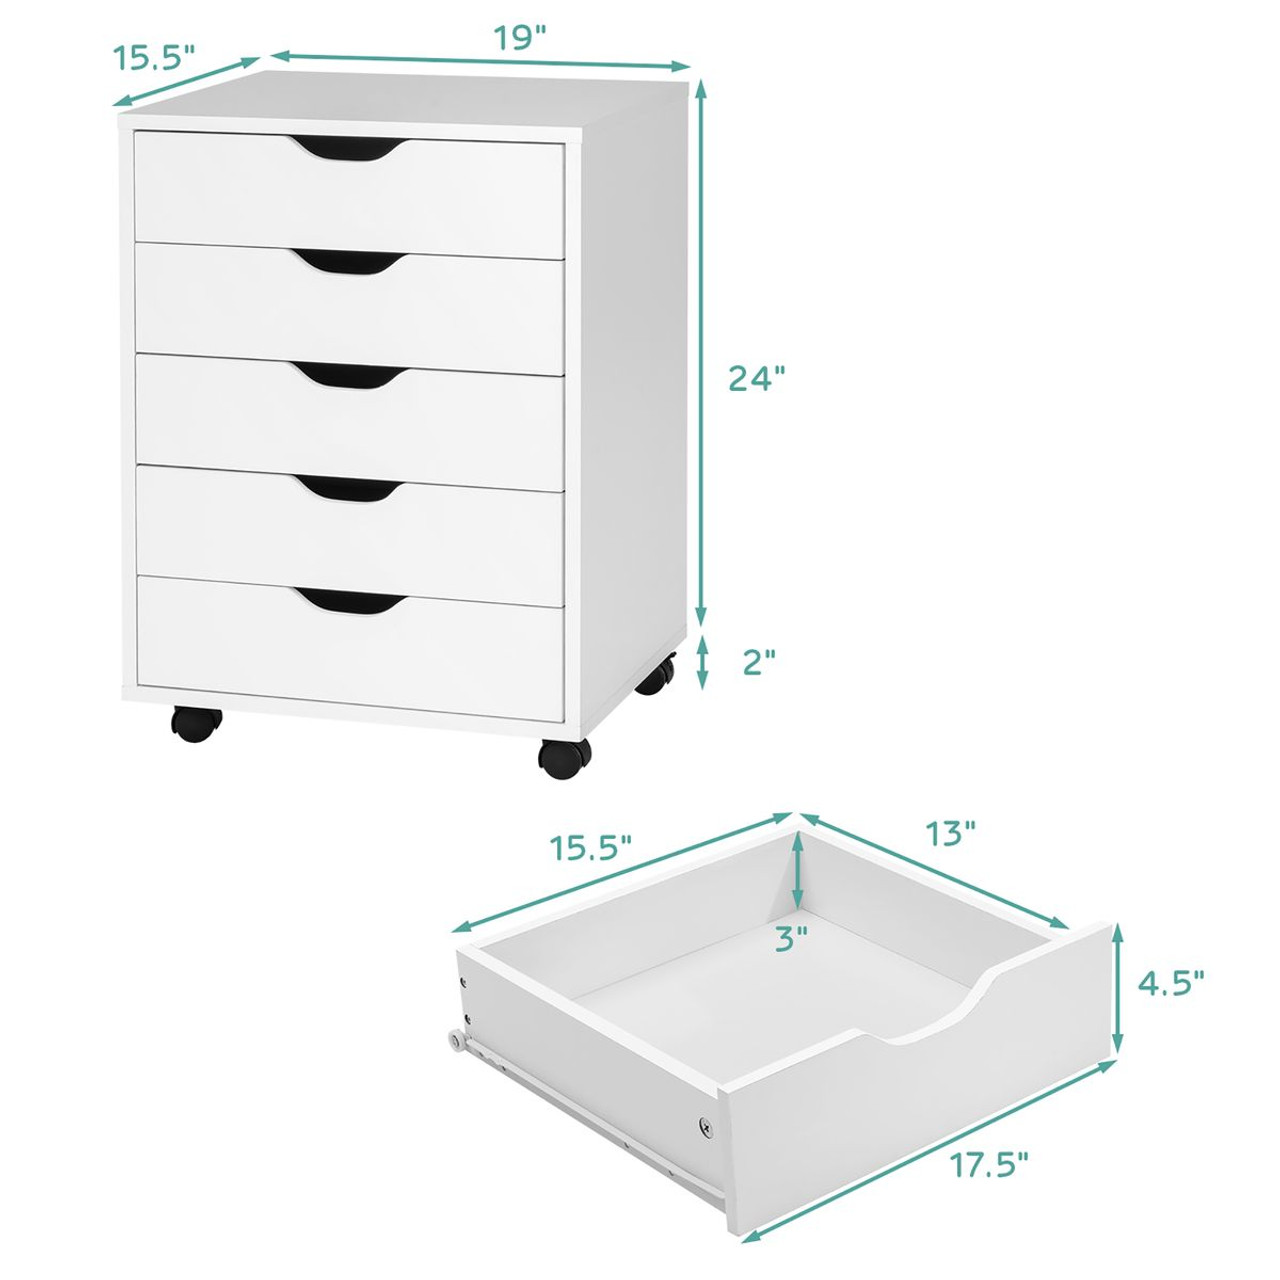 Costway 5-Drawer Storage Dresser with Wheels product image